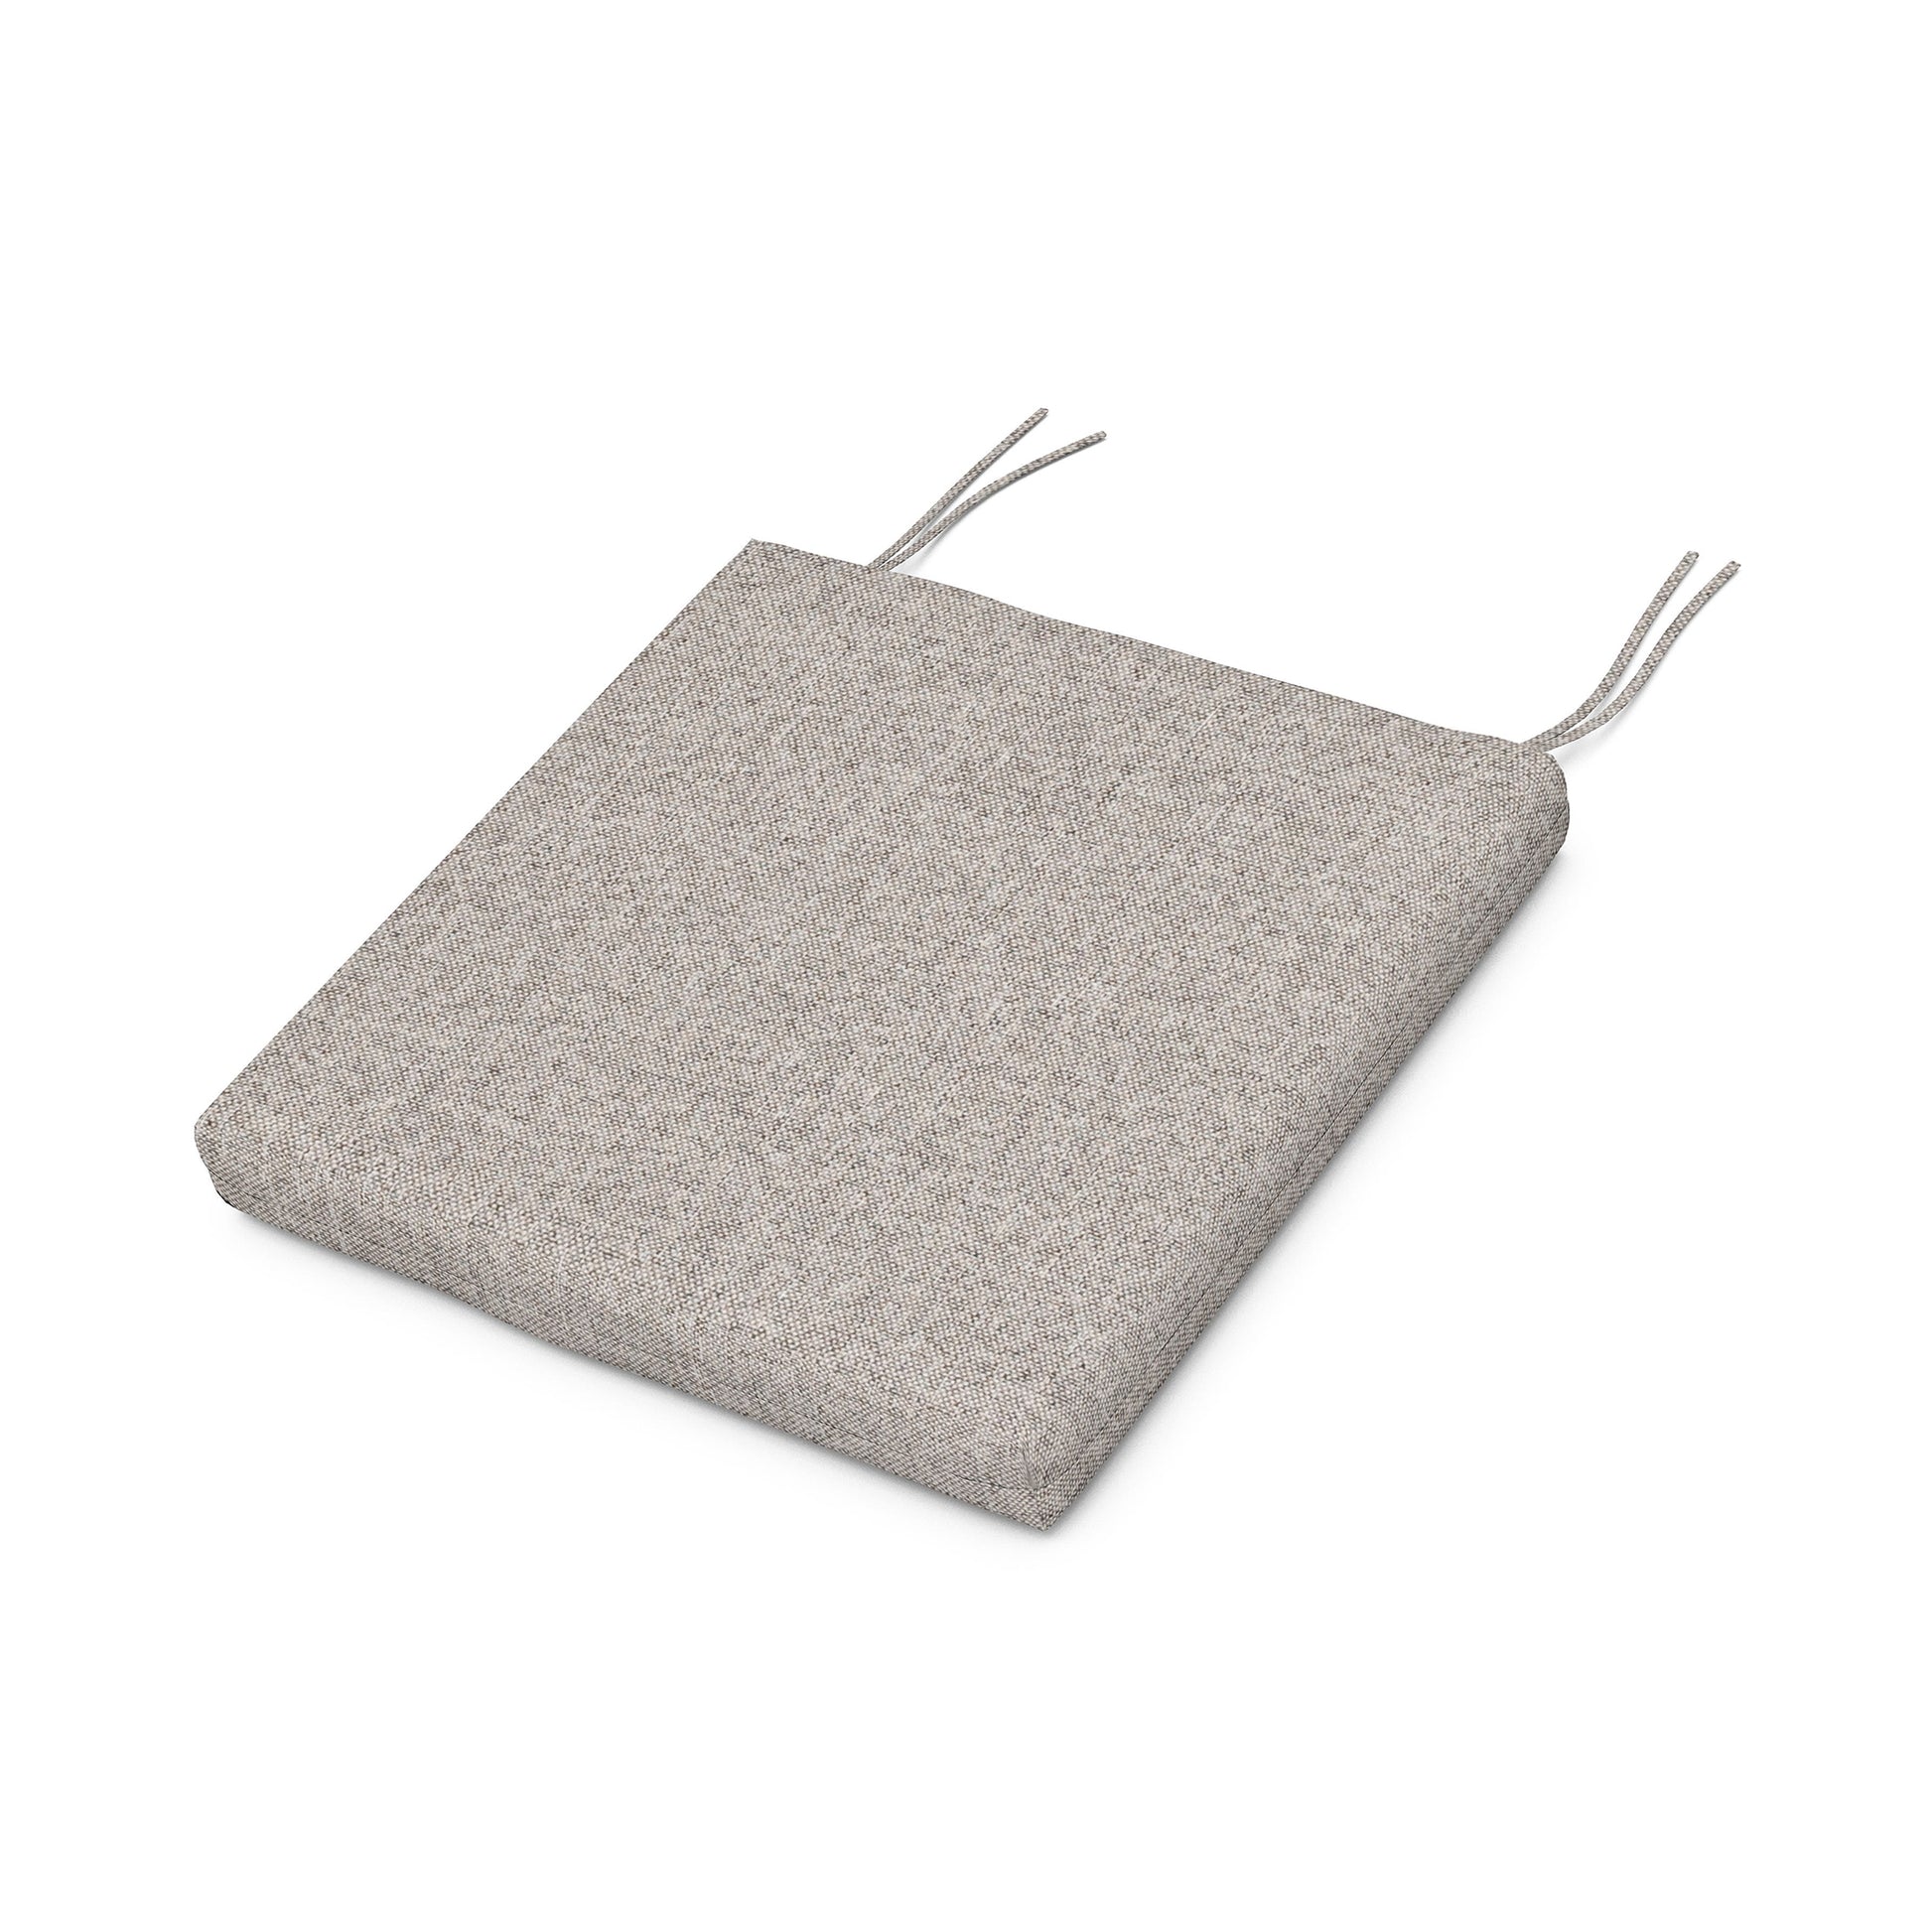 A beige square POLYWOOD XPWS0006 - Seat Cushion on a white background, featuring weather-resistant upholstery fabric for comfort and durability.